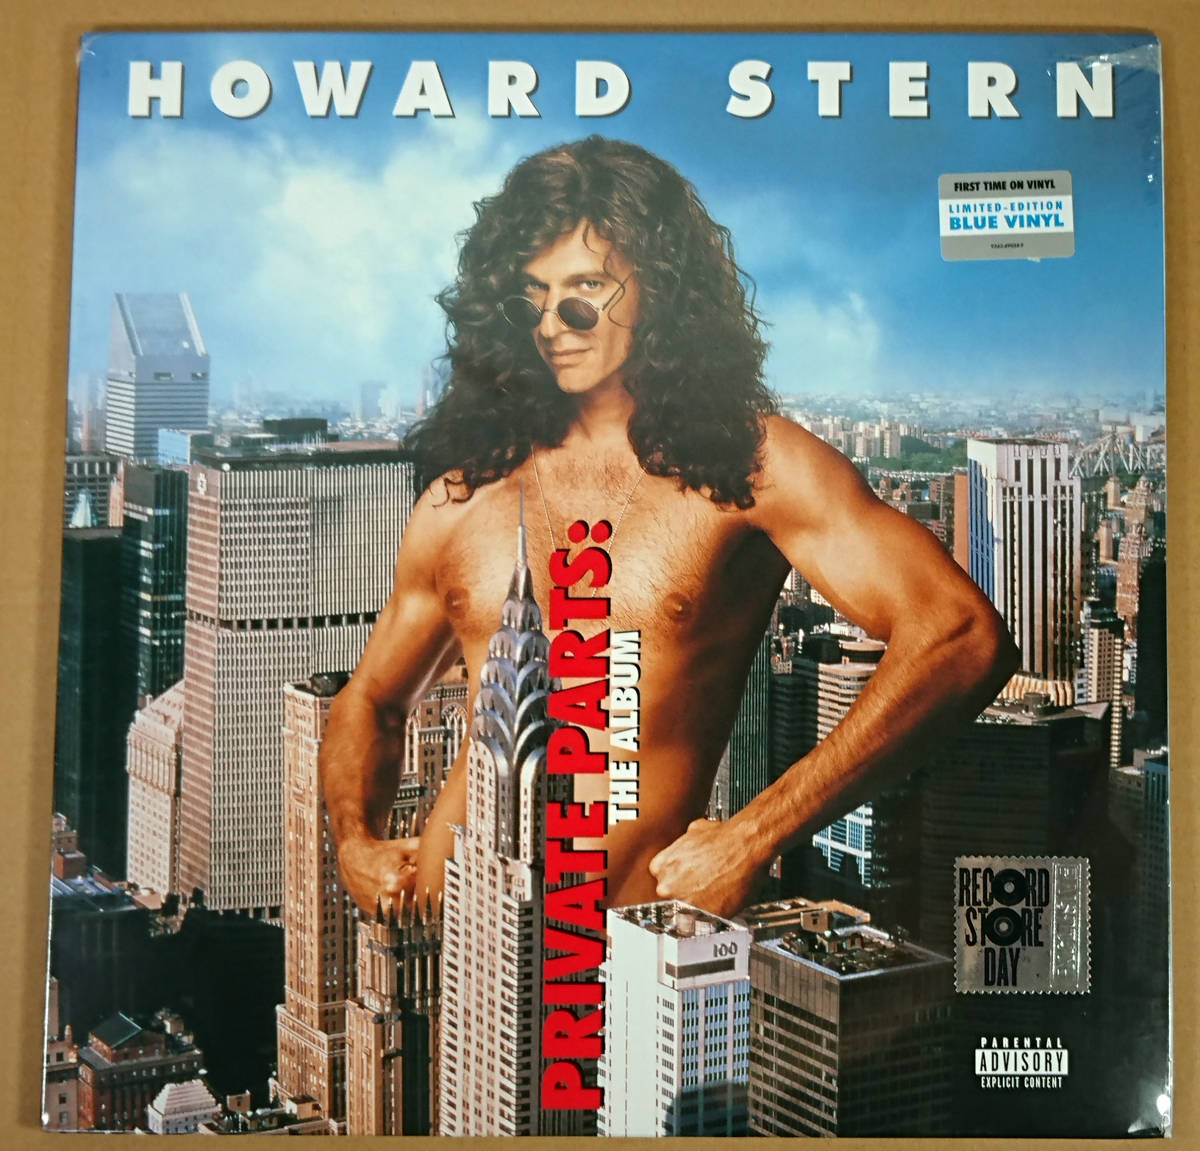 Blue2LP V.A. HOWARD STERN PRIVATE PARTS Ozzy Osbourne Type O Negative Van Halen AC/DC Marilyn Manson RSD RECORD STORE DAY 2019